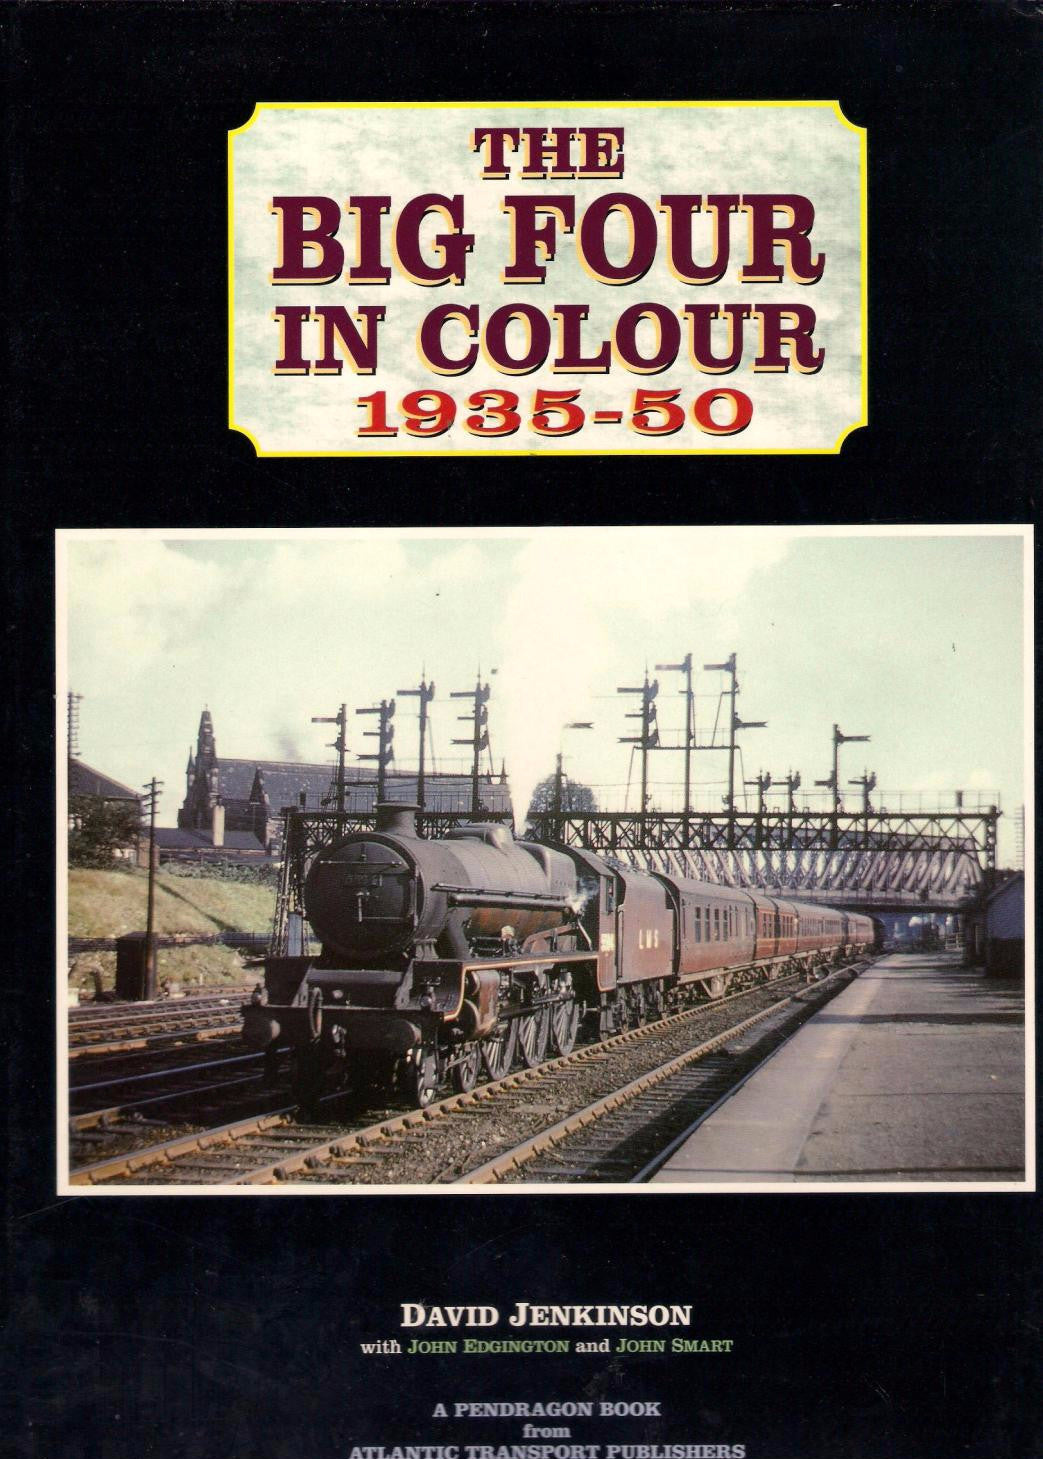 The Big Four in Colour 1935-50